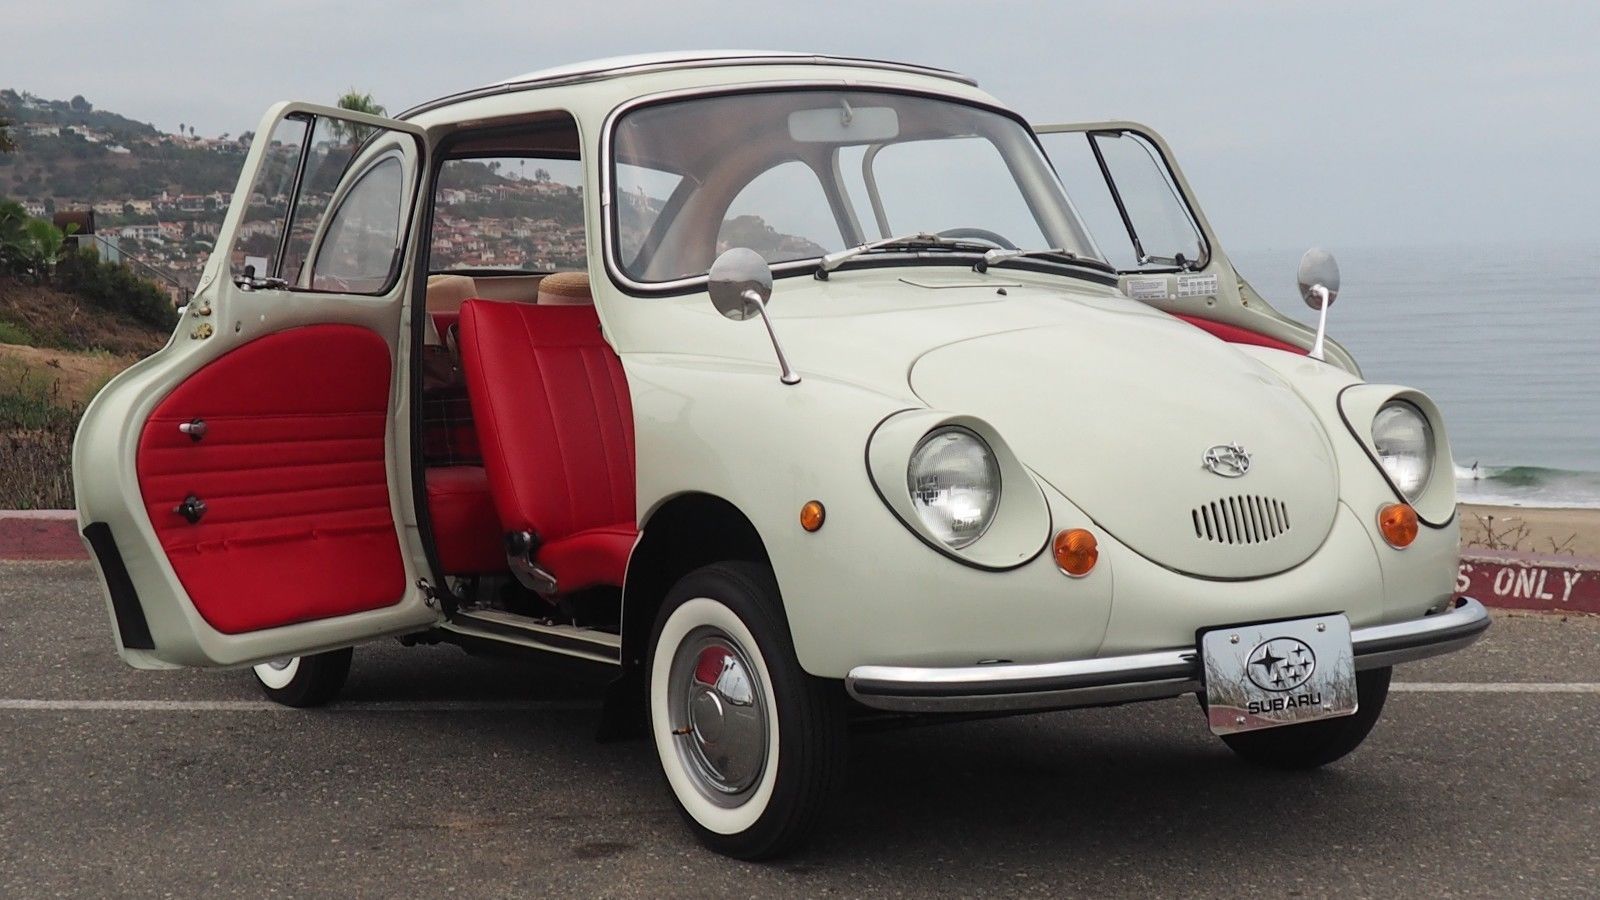 Bricklin got into experimental safety vehciles trying to fix issues with the Subaru 360